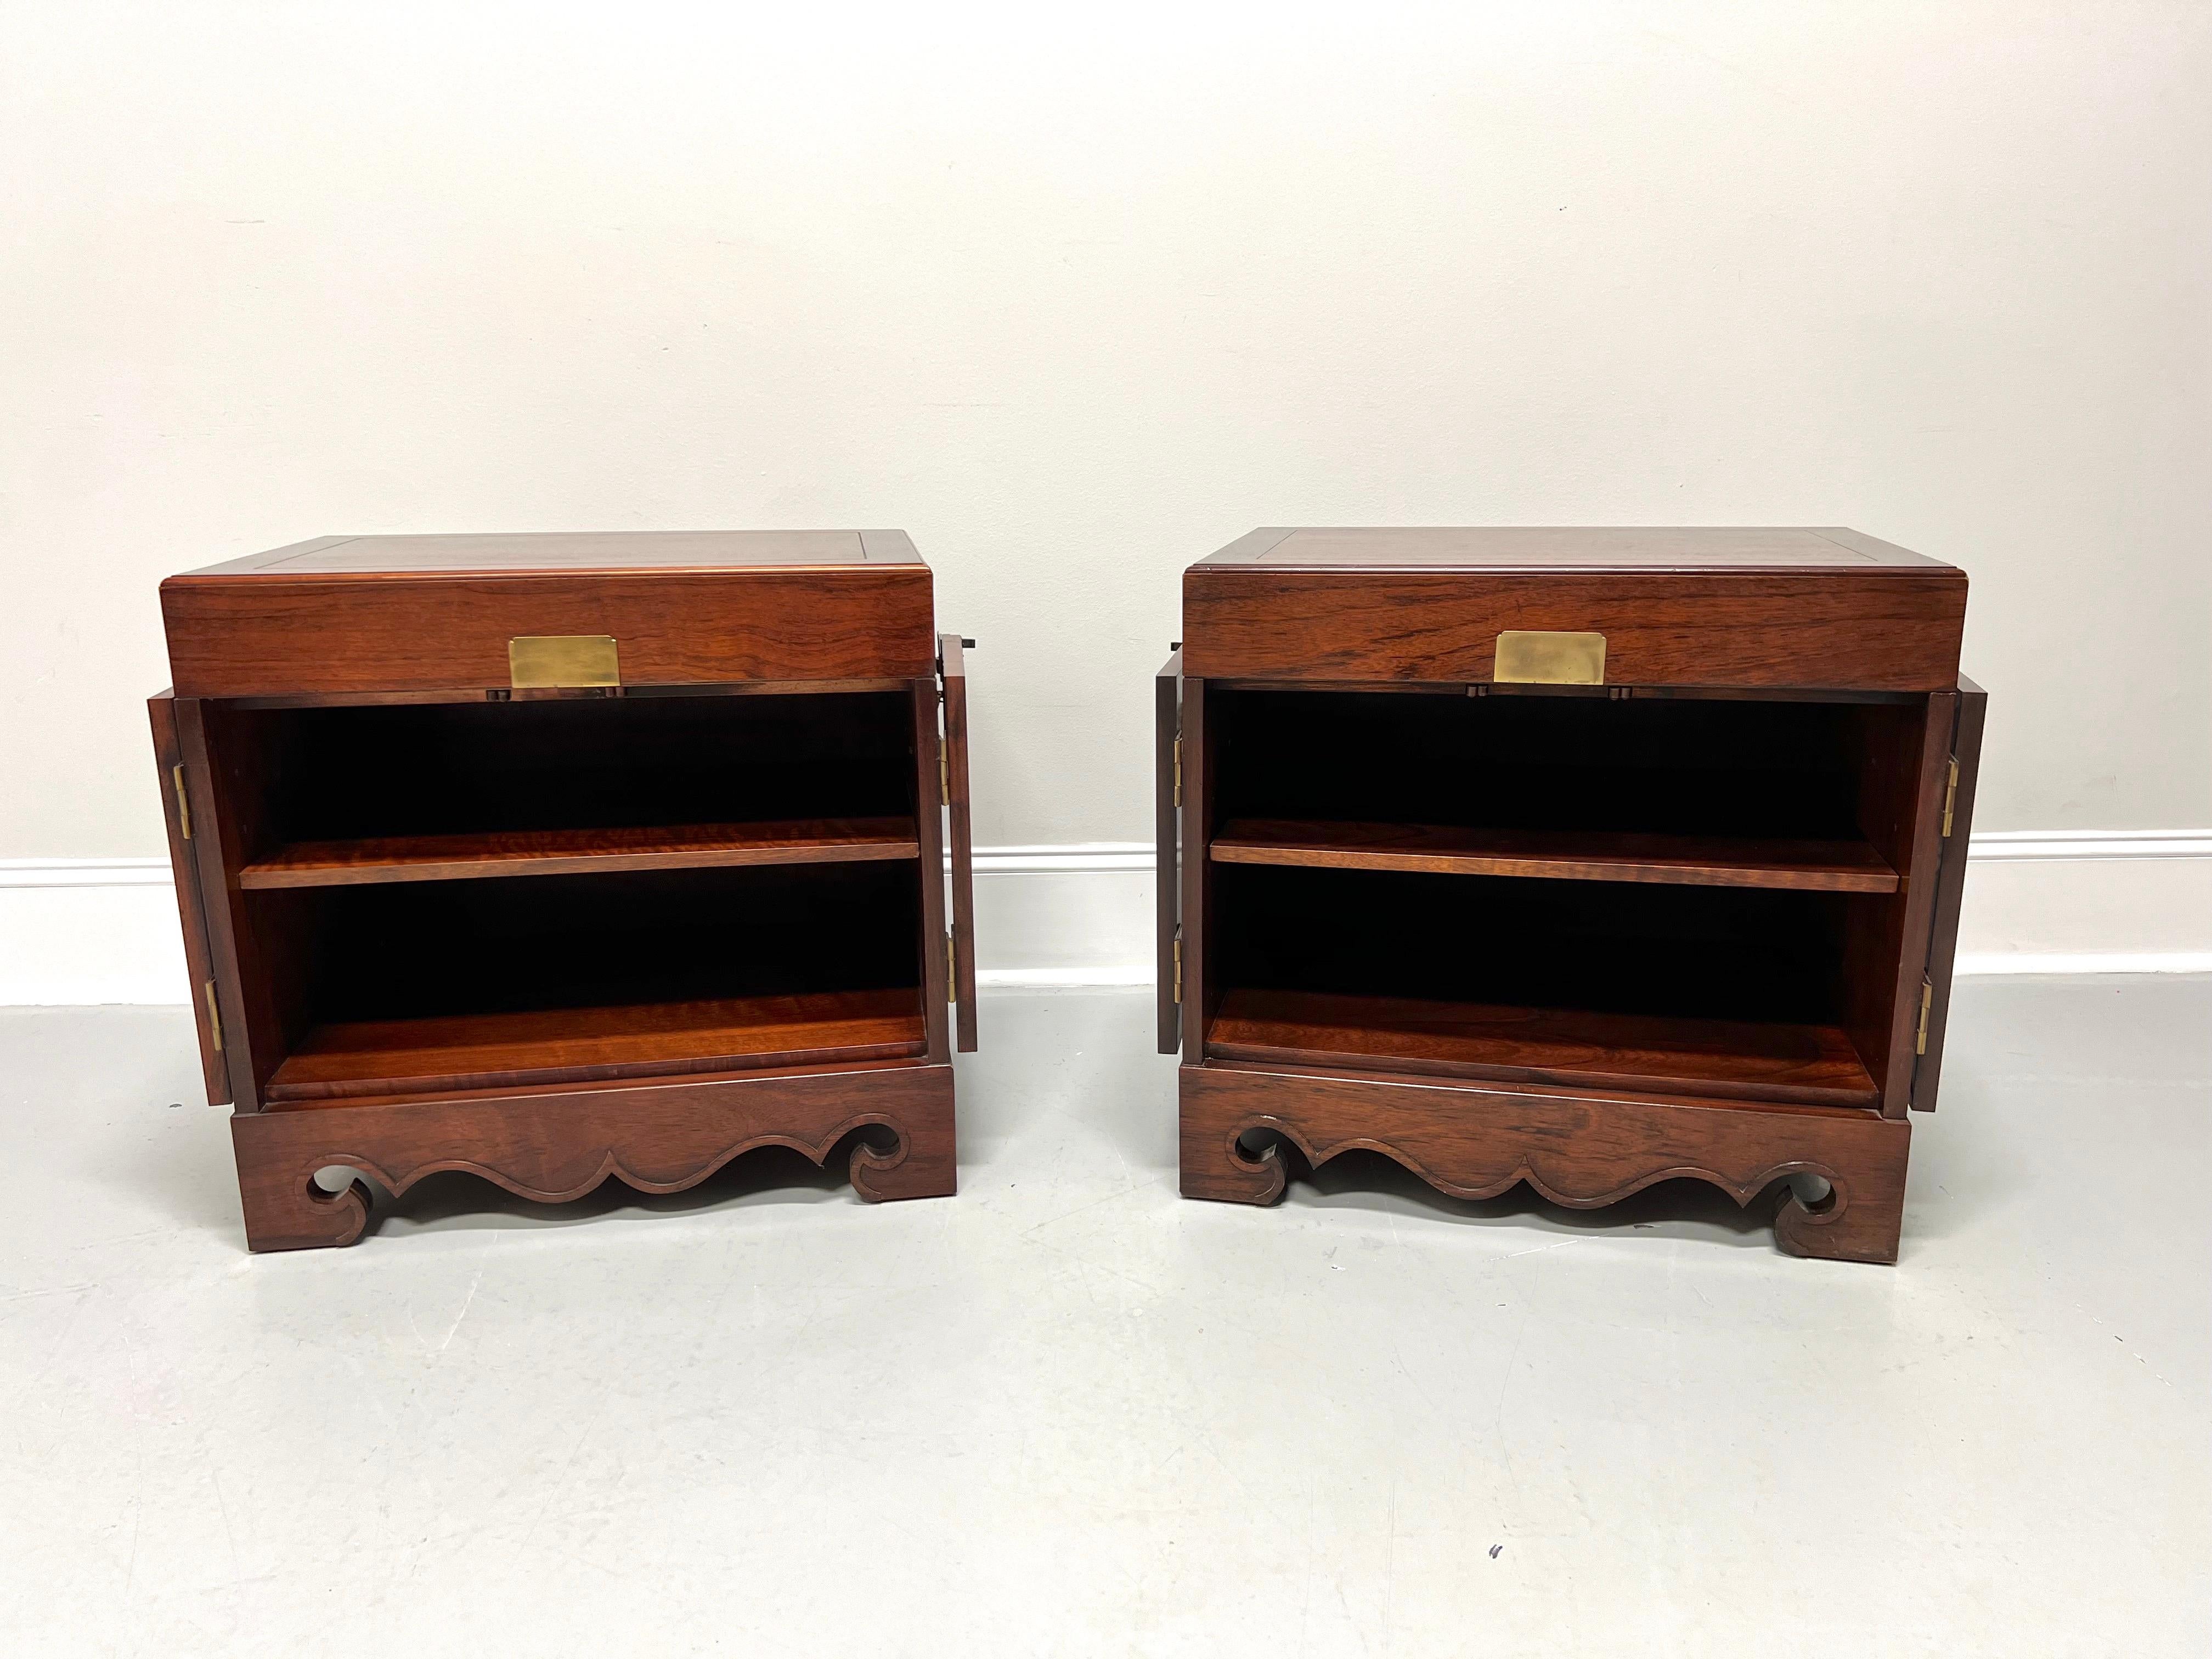 Brass Michael Taylor for BAKER Mahogany Asian Inspired Chinoiserie Nightstands - Pair For Sale